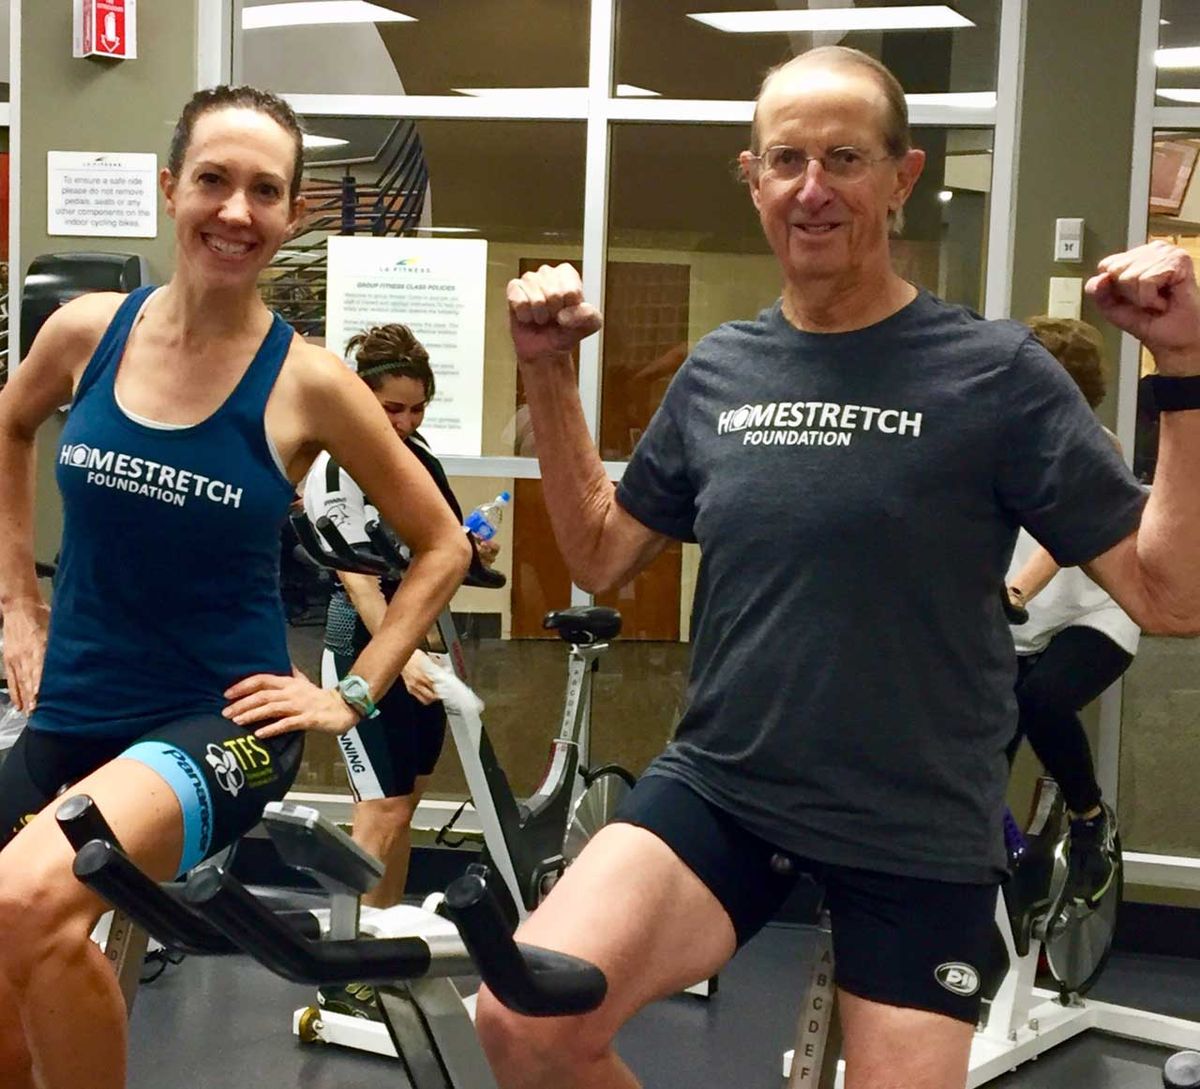 kathryn bertine and her dad at a spin class